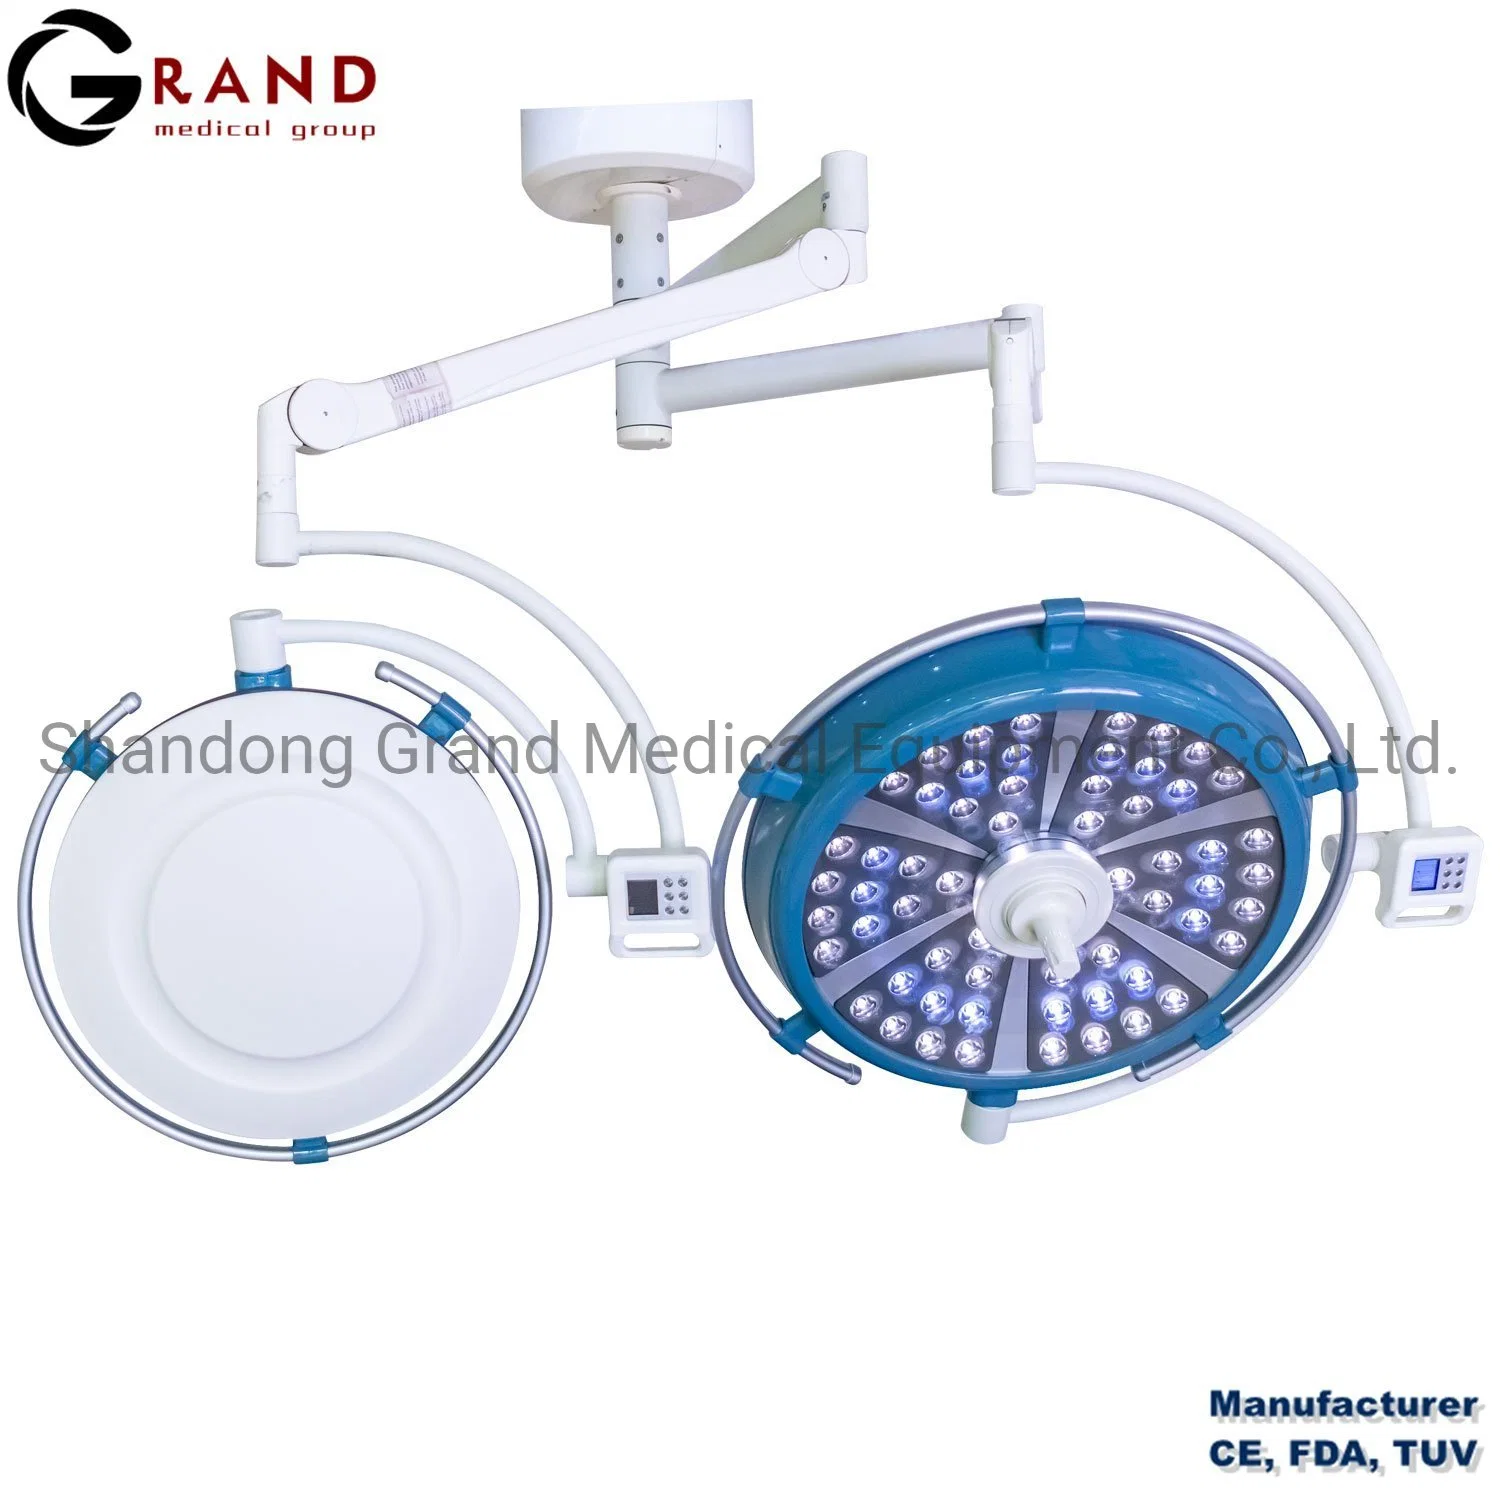 Hospital Equipment Medical Device LED Shadowless Light Medical LED Surgical Lights Operating Room Examination Ot Lamp Ceiling Operating Table Light